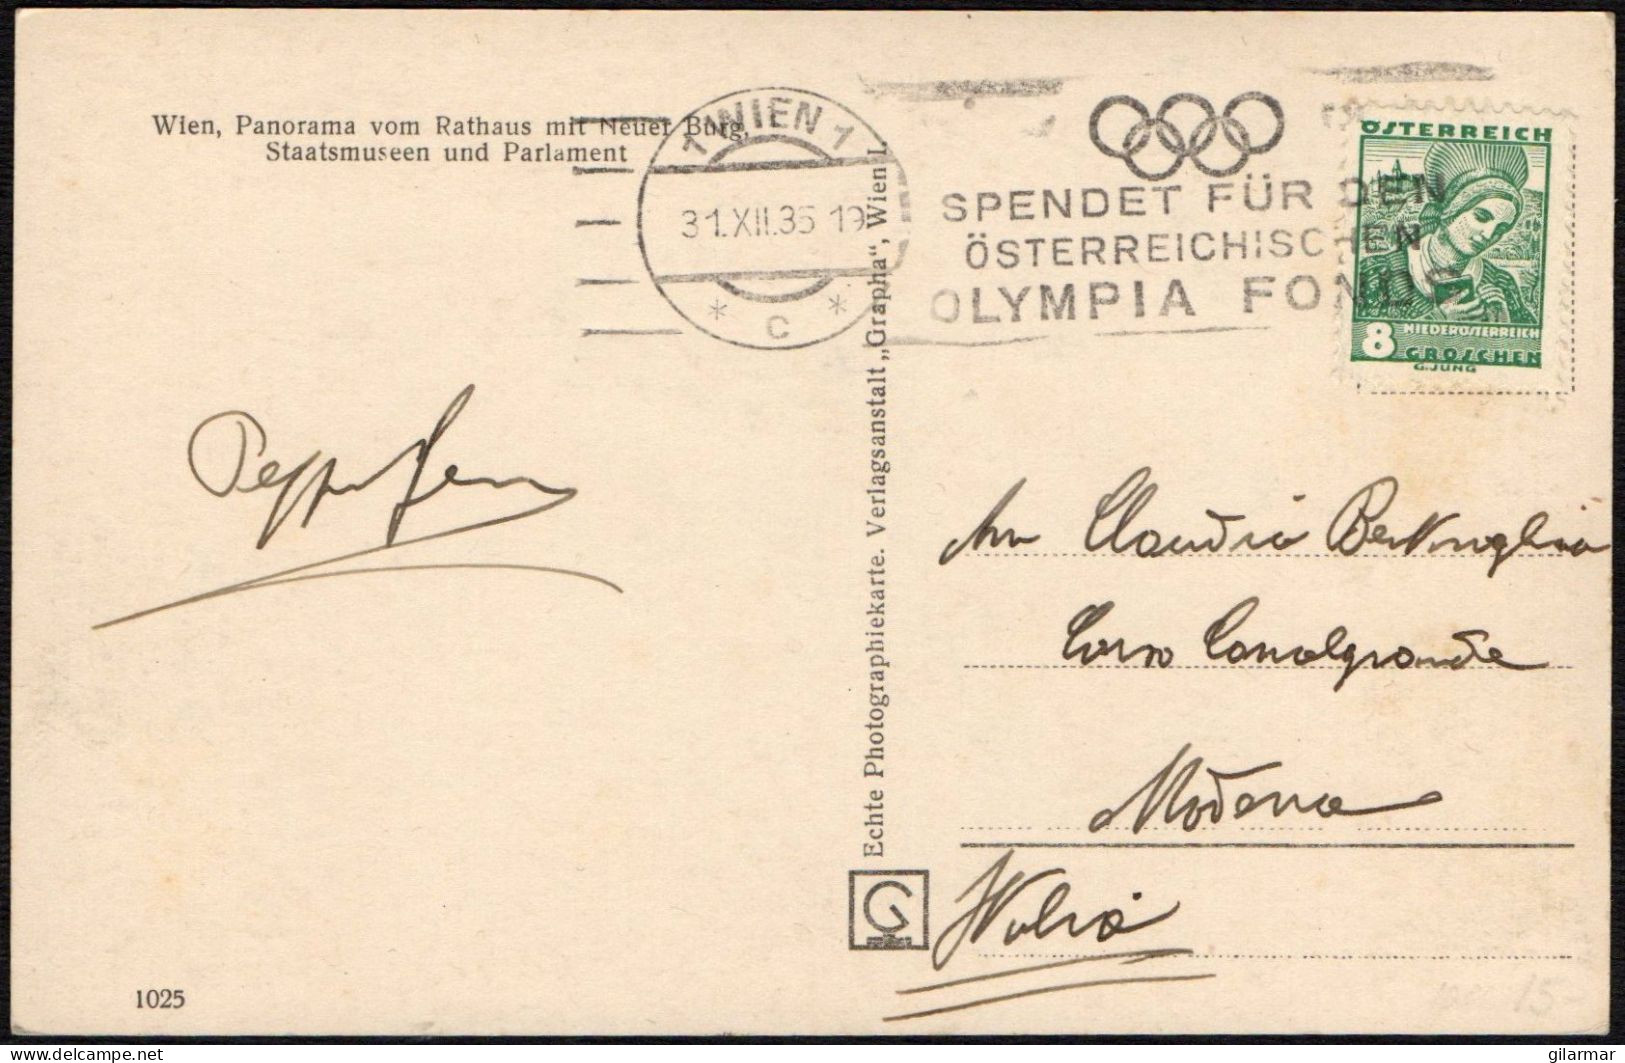 OLYMPIC GAMES 1936 - AUSTRIA WIEN 1 C 1935 - DONATE TO THE AUSTRIAN OLYMPIC FUND - MAILED POSTCARD - M - Estate 1936: Berlino